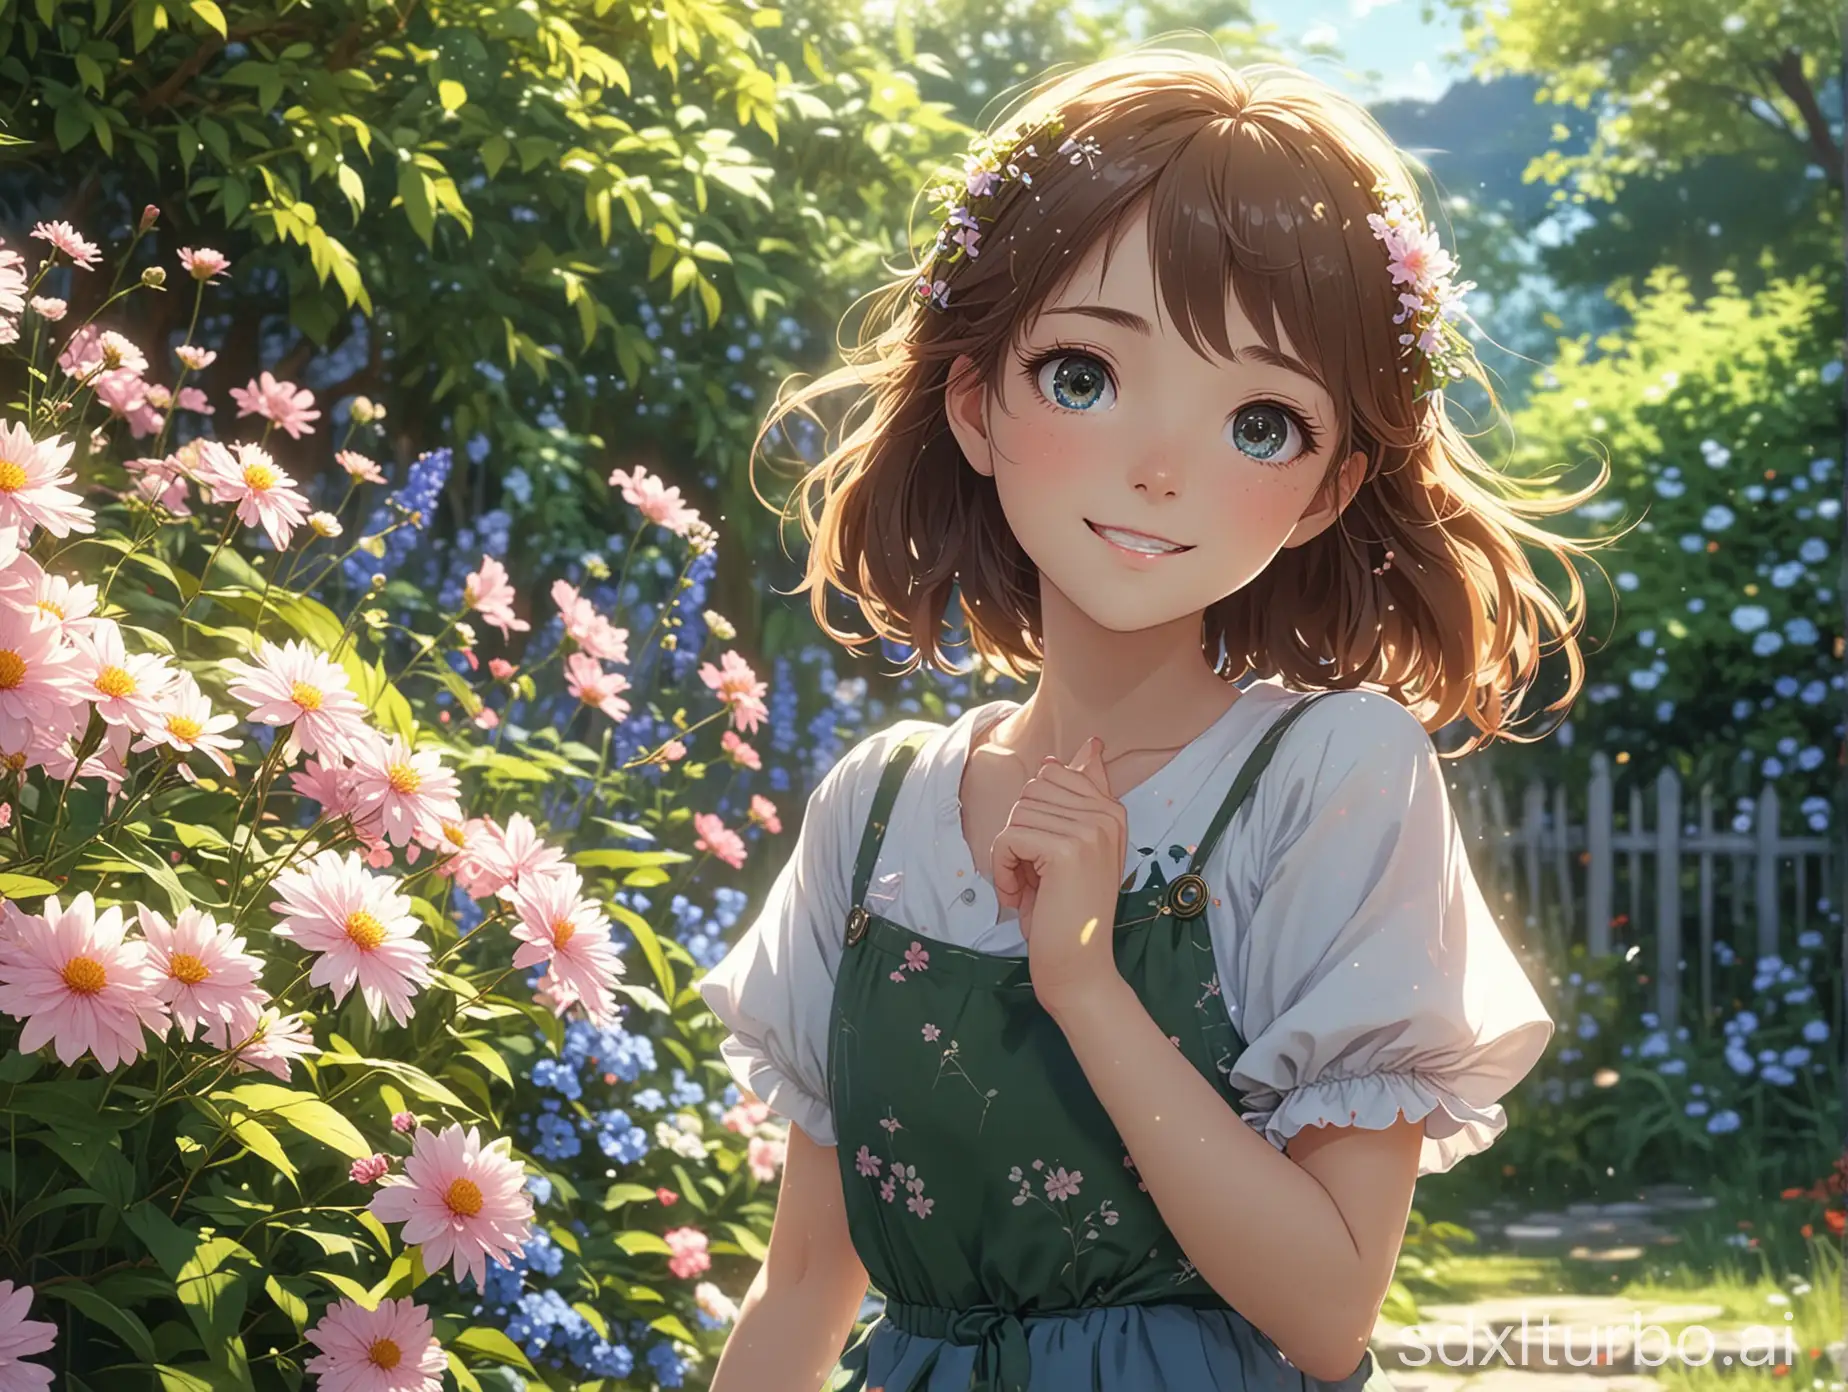 Flowers of happiness girl in the garden, anime image, confidently shining, high-definition image, rich in detail, movie-like feeling